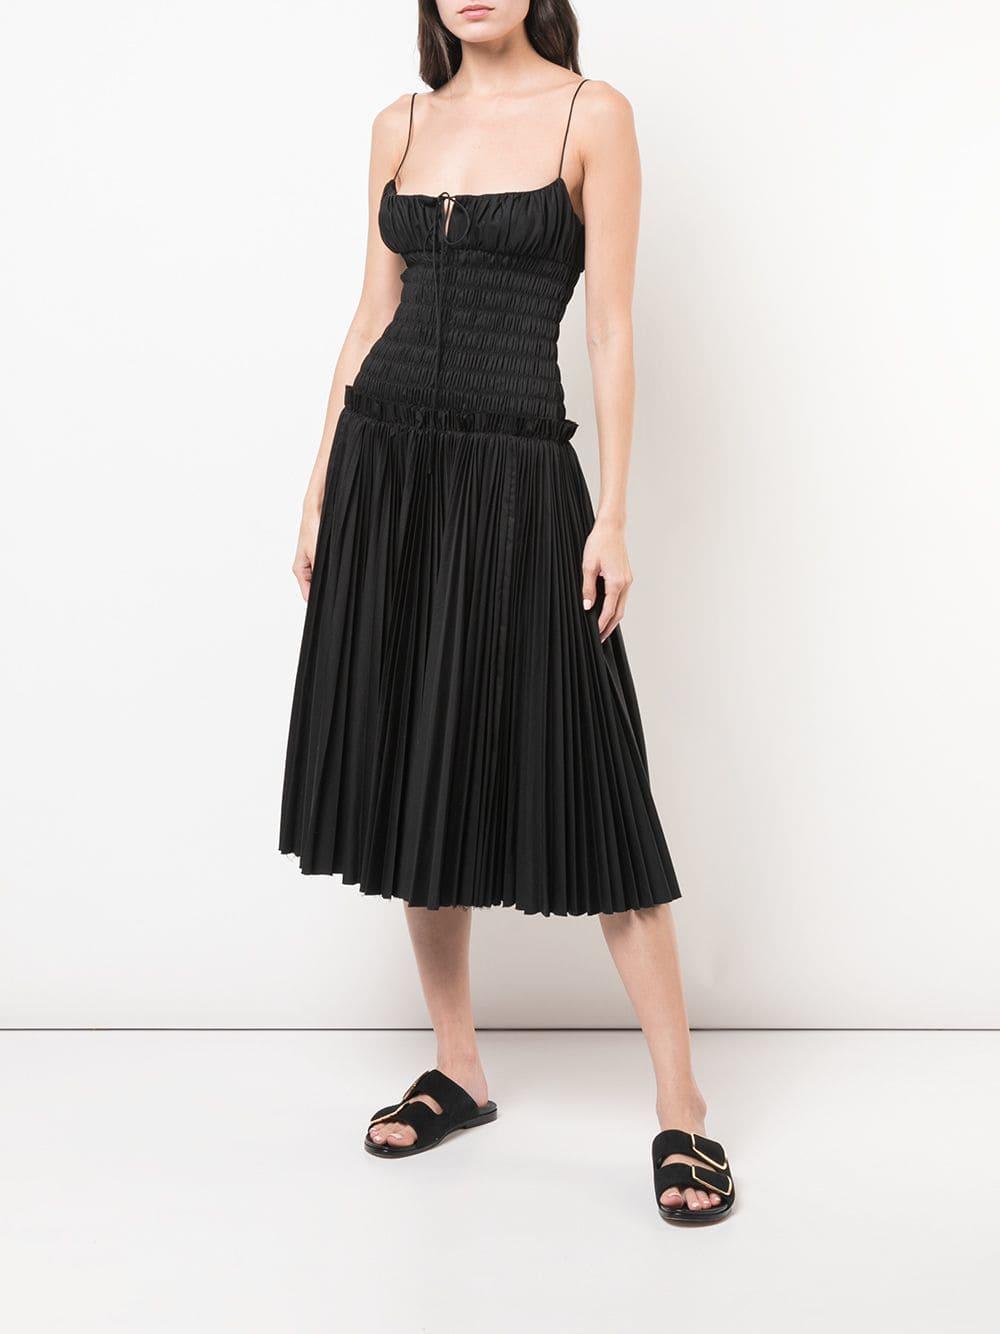 Khaite Cotton Gathered Pleated Dress in Black - Save 60% - Lyst